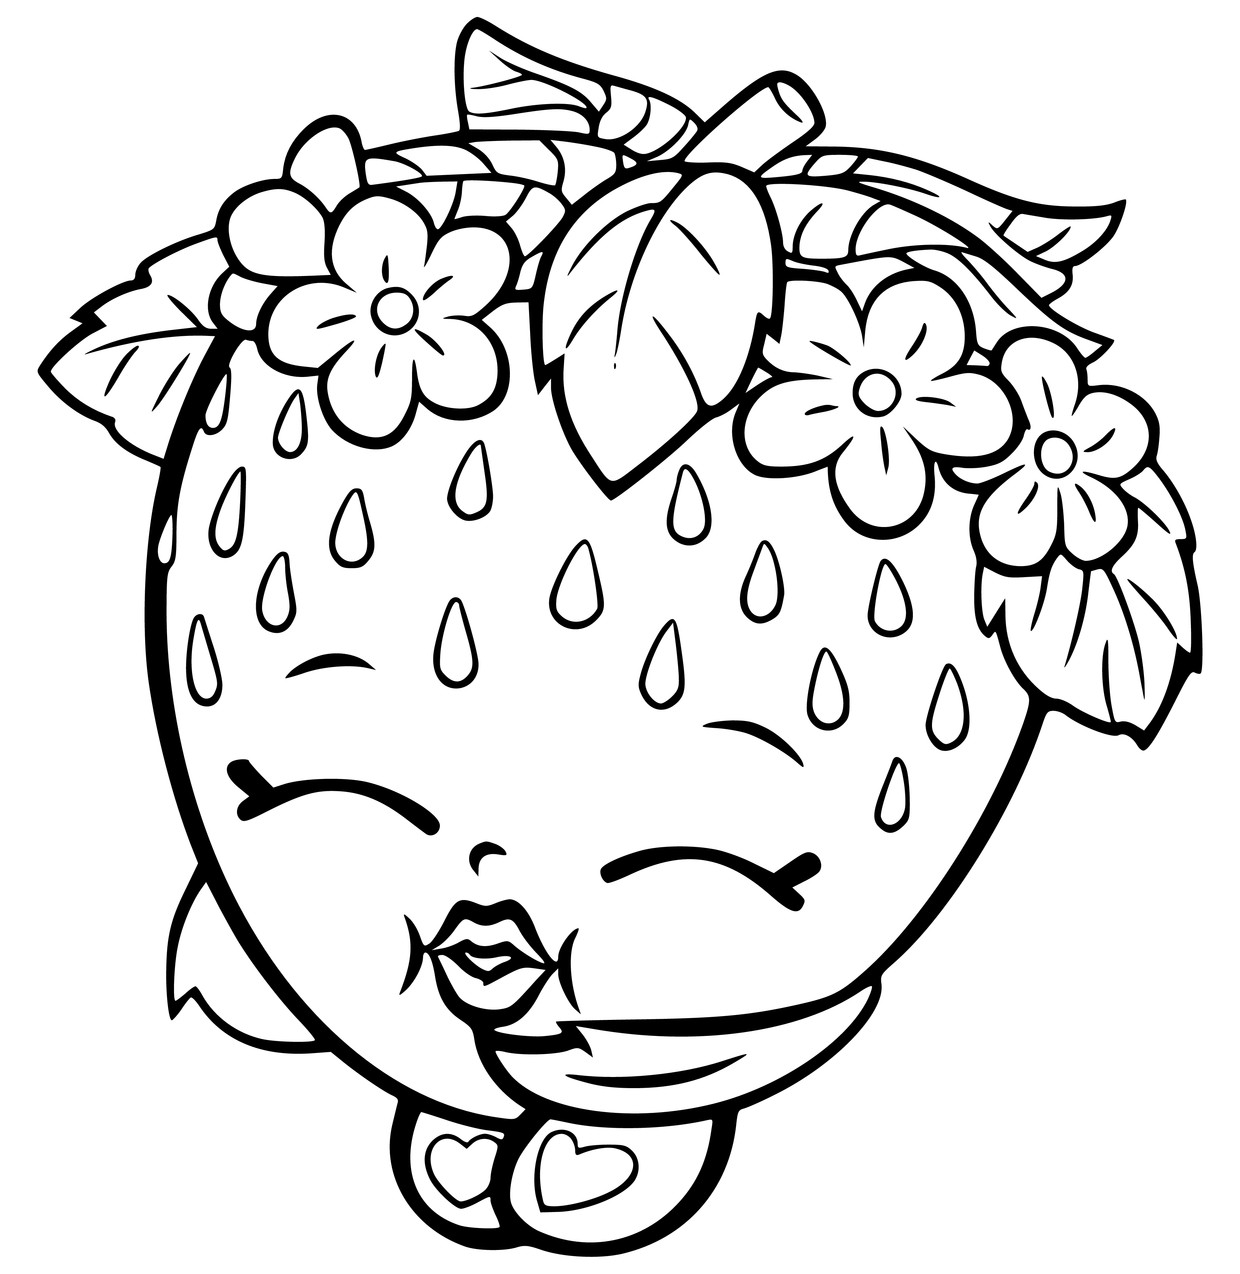 Best Coloring Pages For Kids
 Shopkins Coloring Pages Best Coloring Pages For Kids